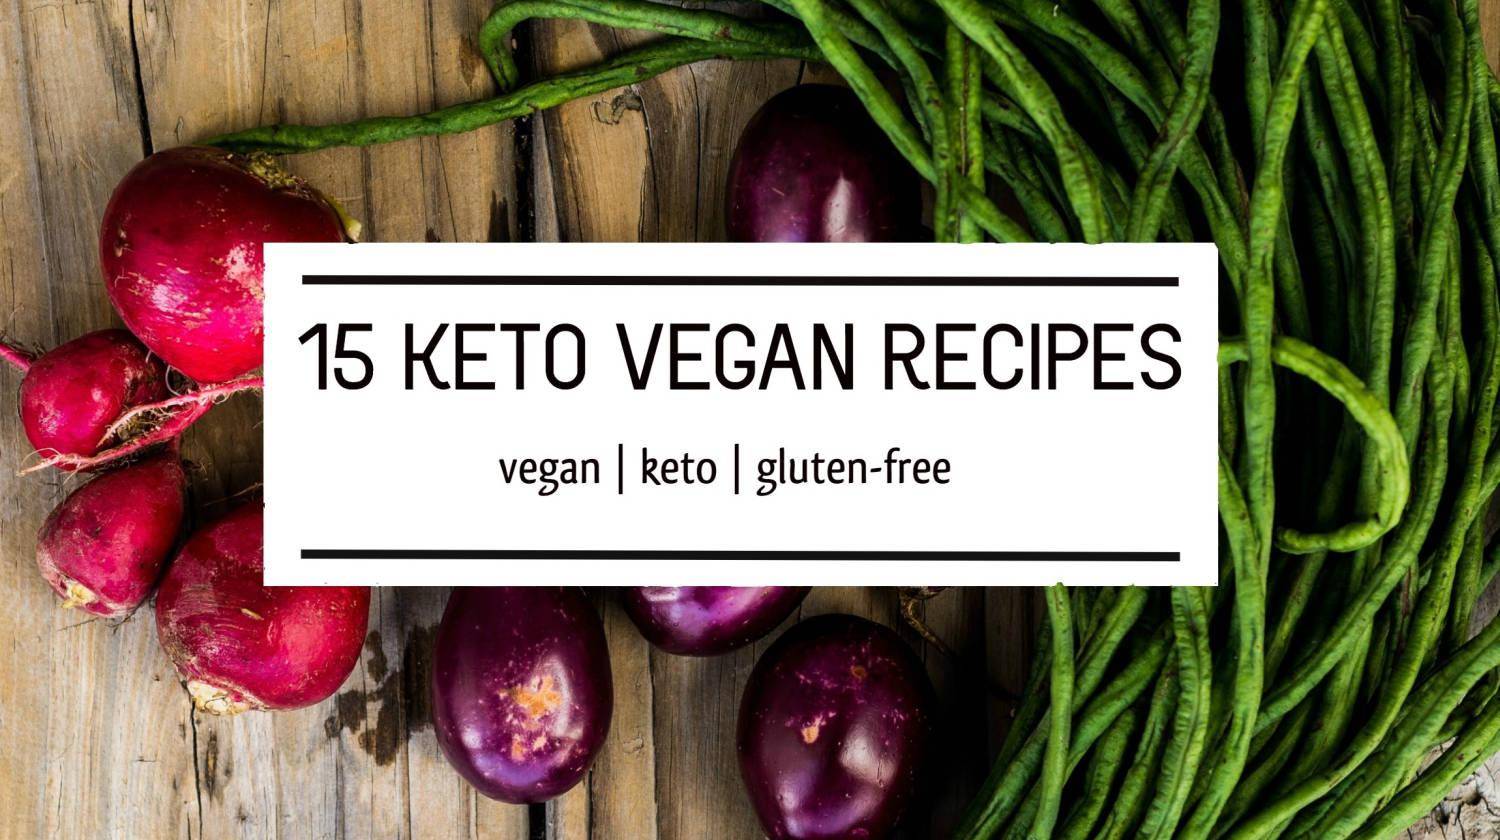 Featured | Vegan Keto recipes | Vegan Keto Recipes To Help You Burn Fat and Lose Weight